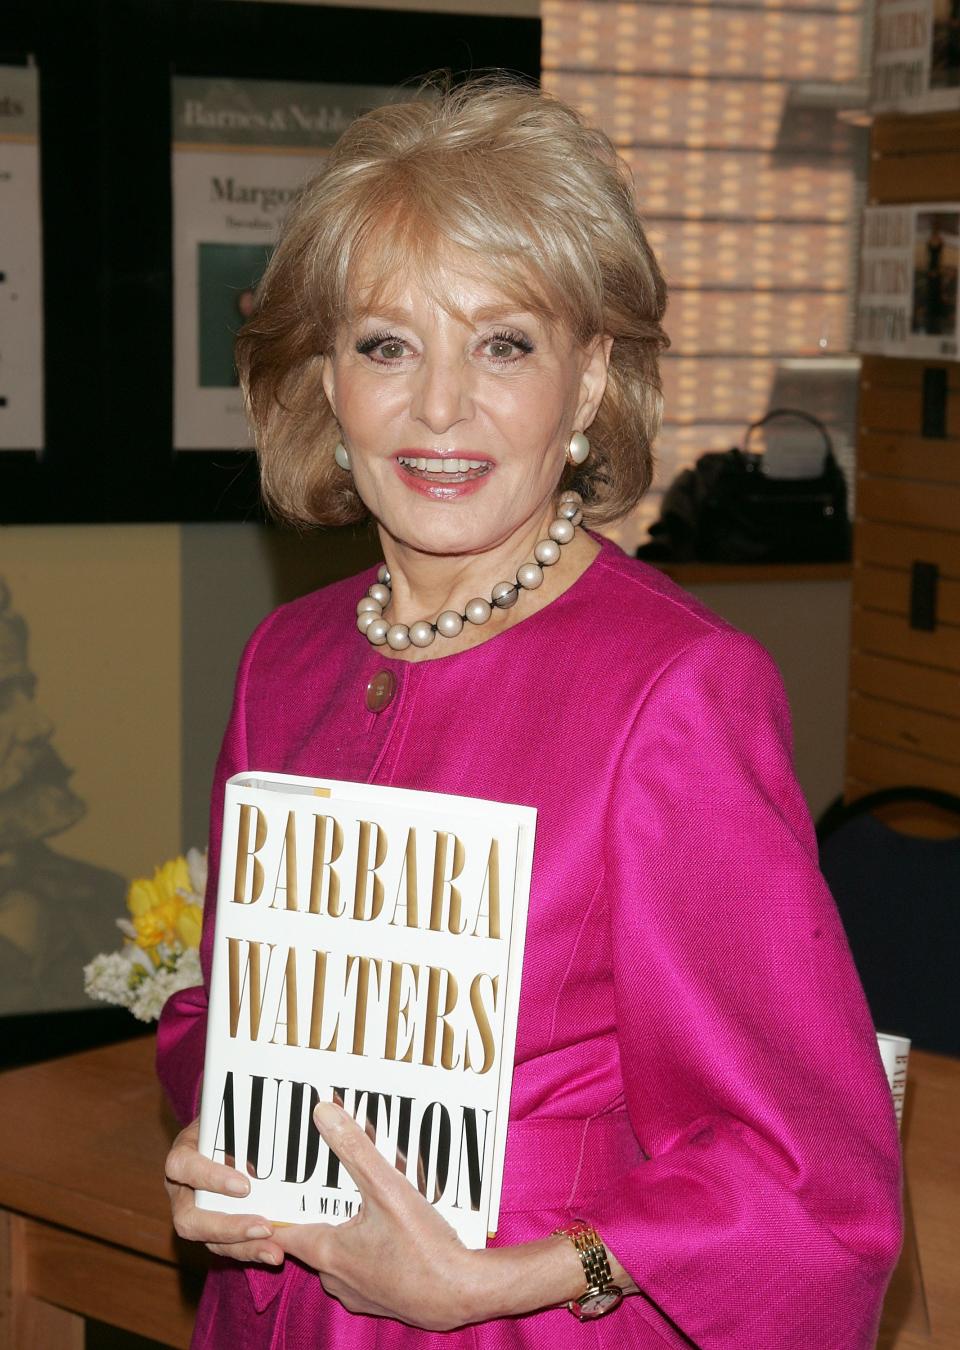 Barbara Walters signs copies of her book "Audition: A Memoir" at Barnes & Noble, Lincoln Sqaure on May 6, 2008 in New York City